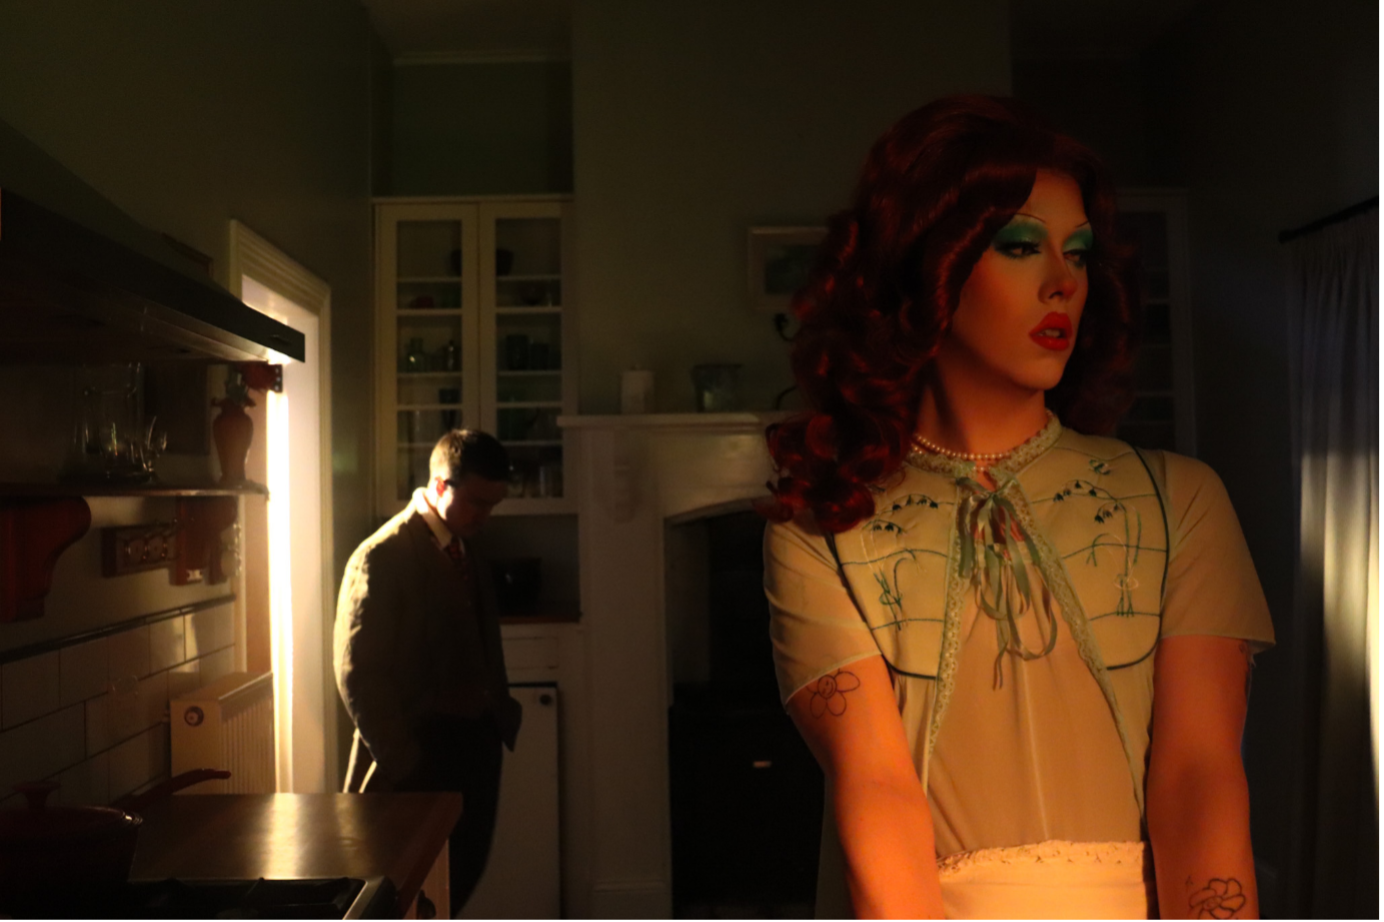 two characters standing in a dimly lit kitchen, one facing the camera forlorn and the other shadowed in the background